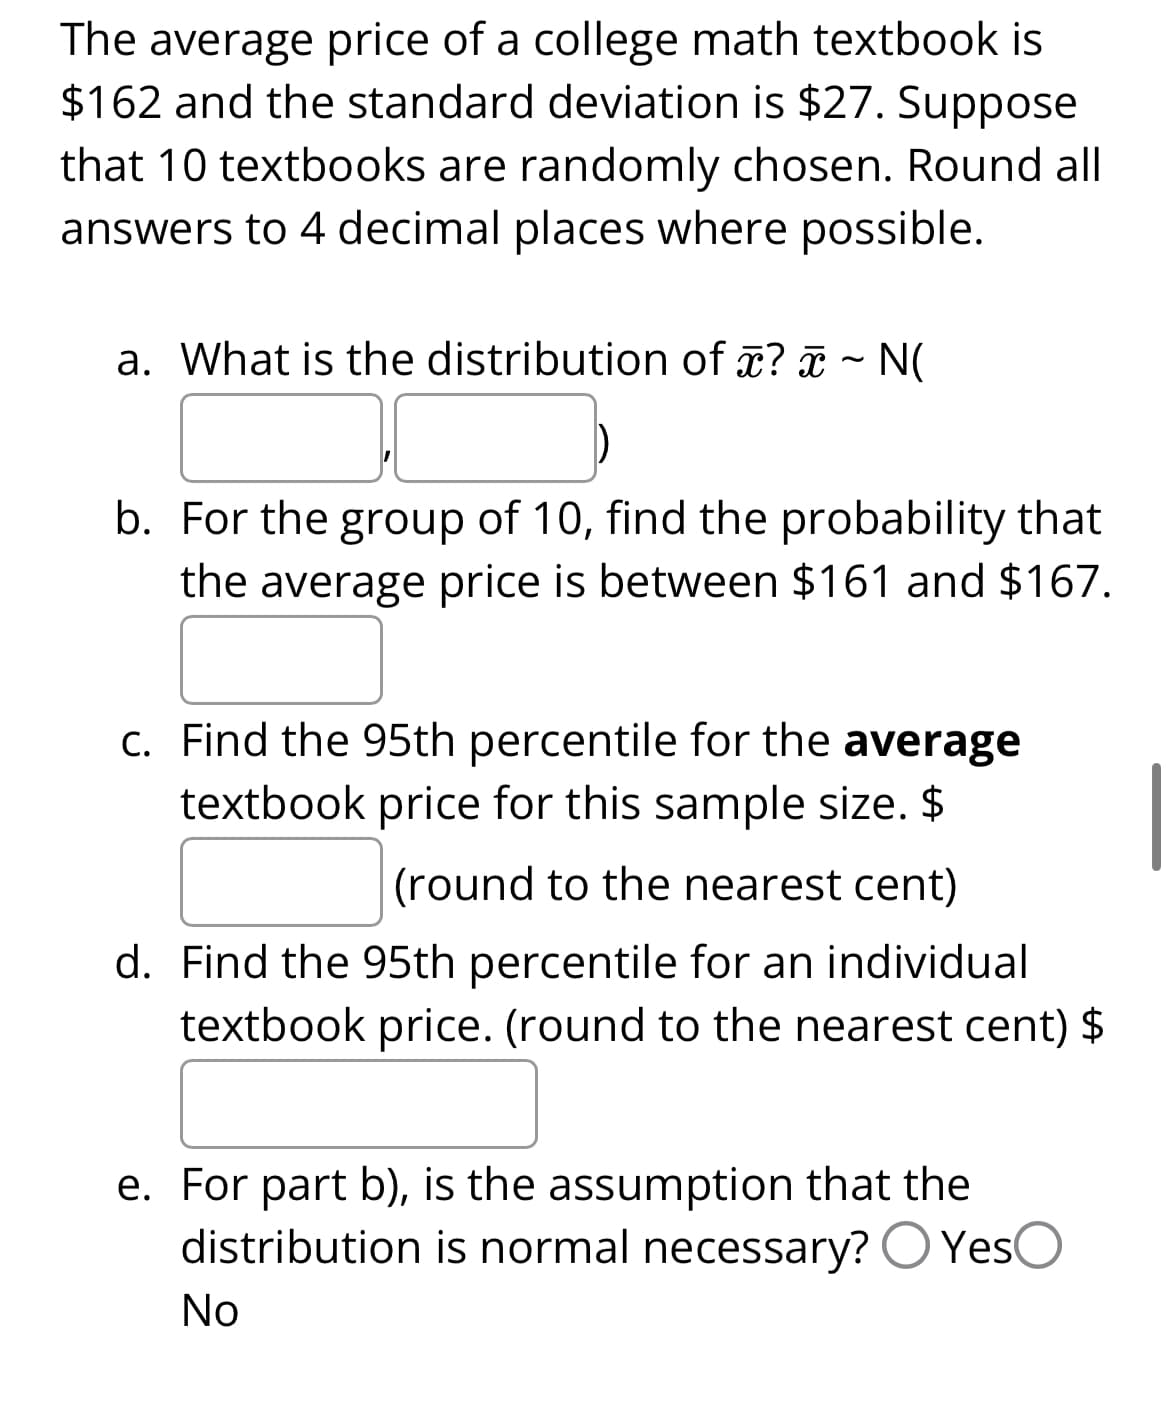 The average price of a college math textbook is
$162 and the standard deviation is $27. Suppose
that 10 textbooks are randomly chosen. Round all
answers to 4 decimal places where possible.
a. What is the distribution of ? ~ N(
b. For the group of 10, find the probability that
the average price is between $161 and $167.
c. Find the 95th percentile for the average
textbook price for this sample size. $
(round to the nearest cent)
d. Find the 95th percentile for an individual
textbook price. (round to the nearest cent) $
e. For part b), is the assumption that the
distribution is normal necessary? YesO
No